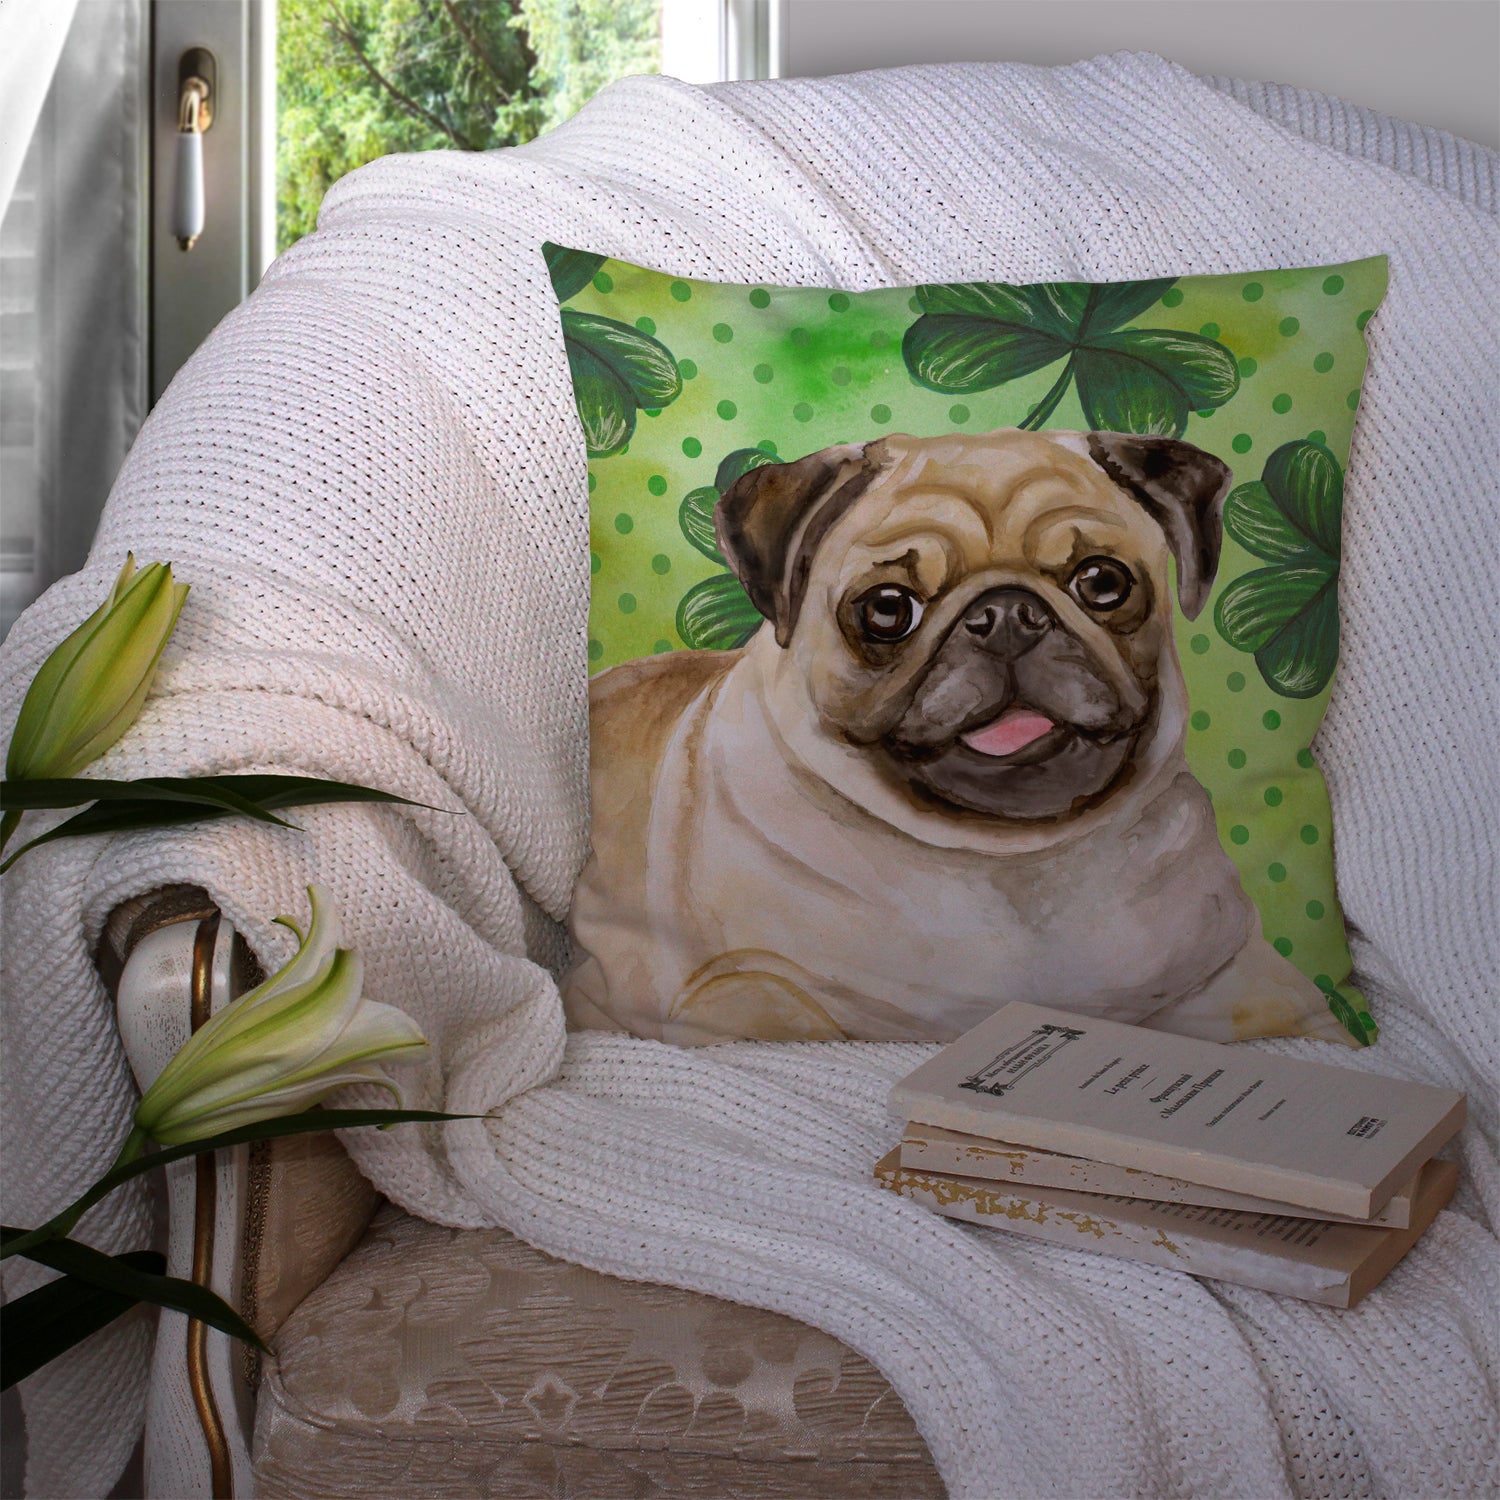 Fawn Pug St Patrick's Fabric Decorative Pillow BB9892PW1414 - the-store.com